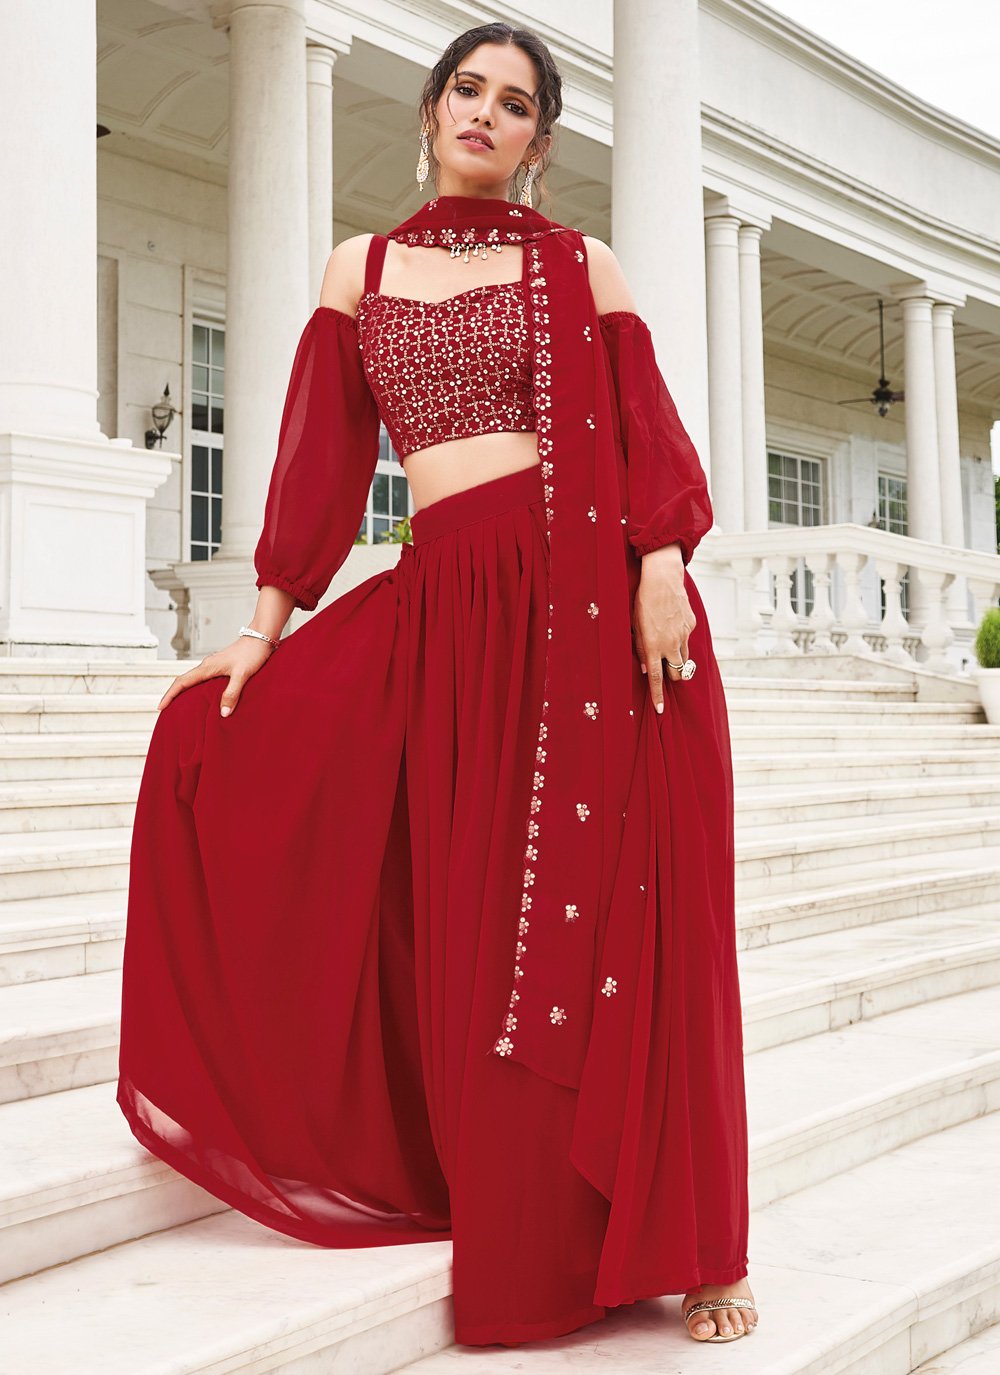 Lehenga KT - 2100 at Rs.1000/Piece in surat offer by Excellent Choice